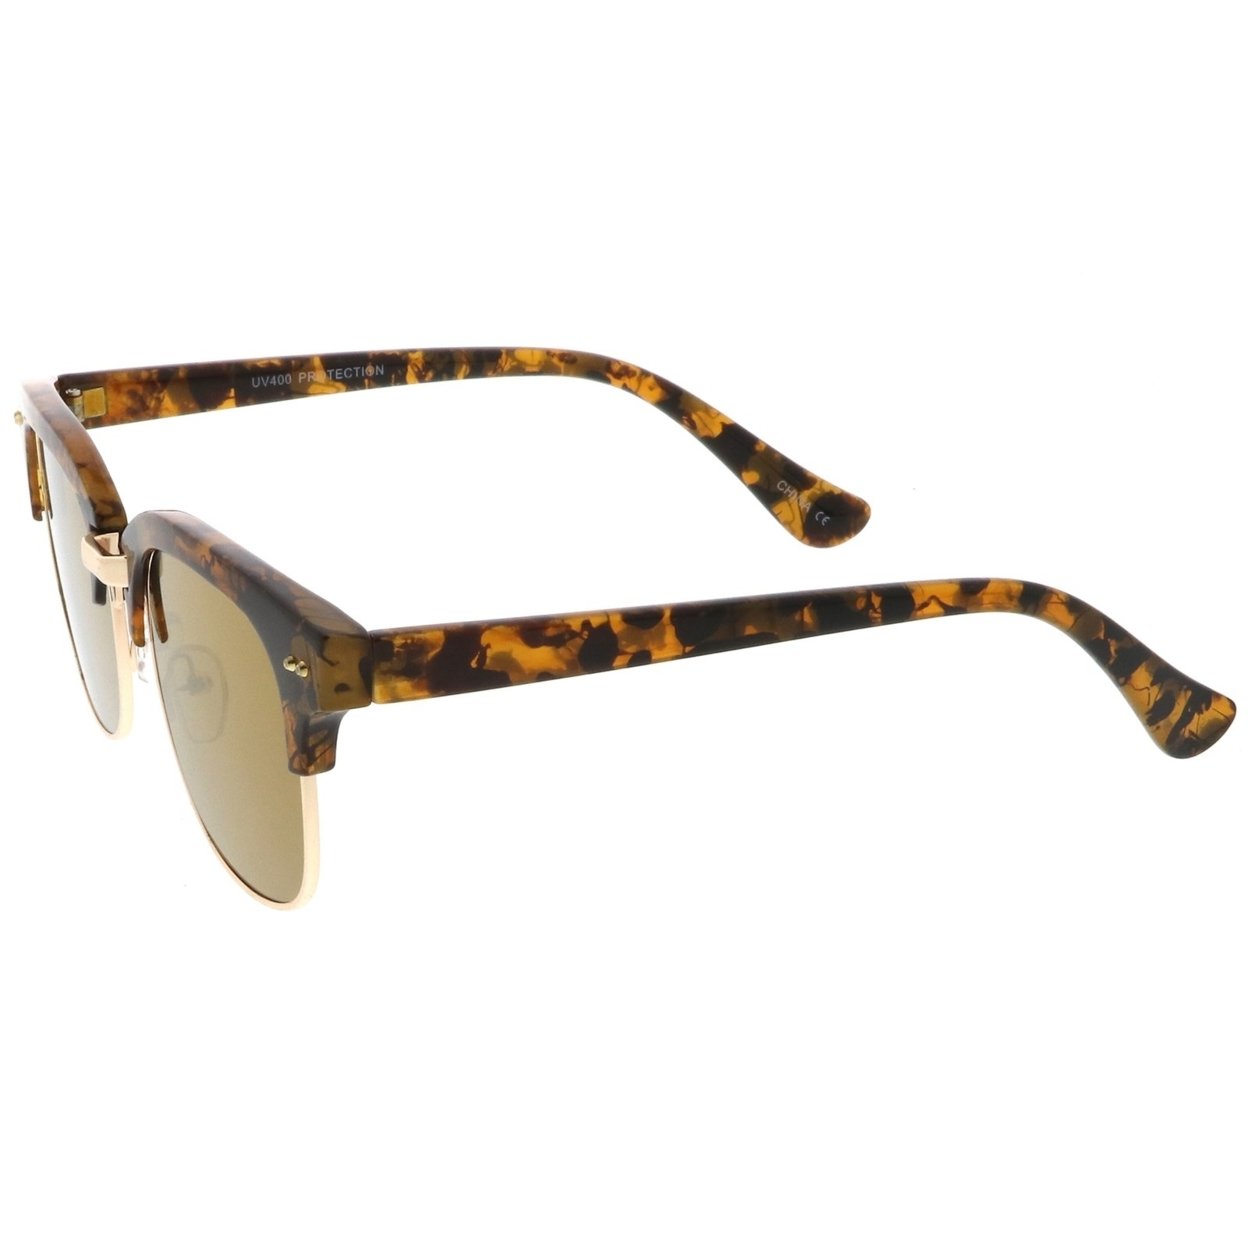 Modern Marble Print Horn Rimmed Mirrored Square Flat Lens Half Frame Sunglasses 51mm - Grey-Gold / Silver Mirror